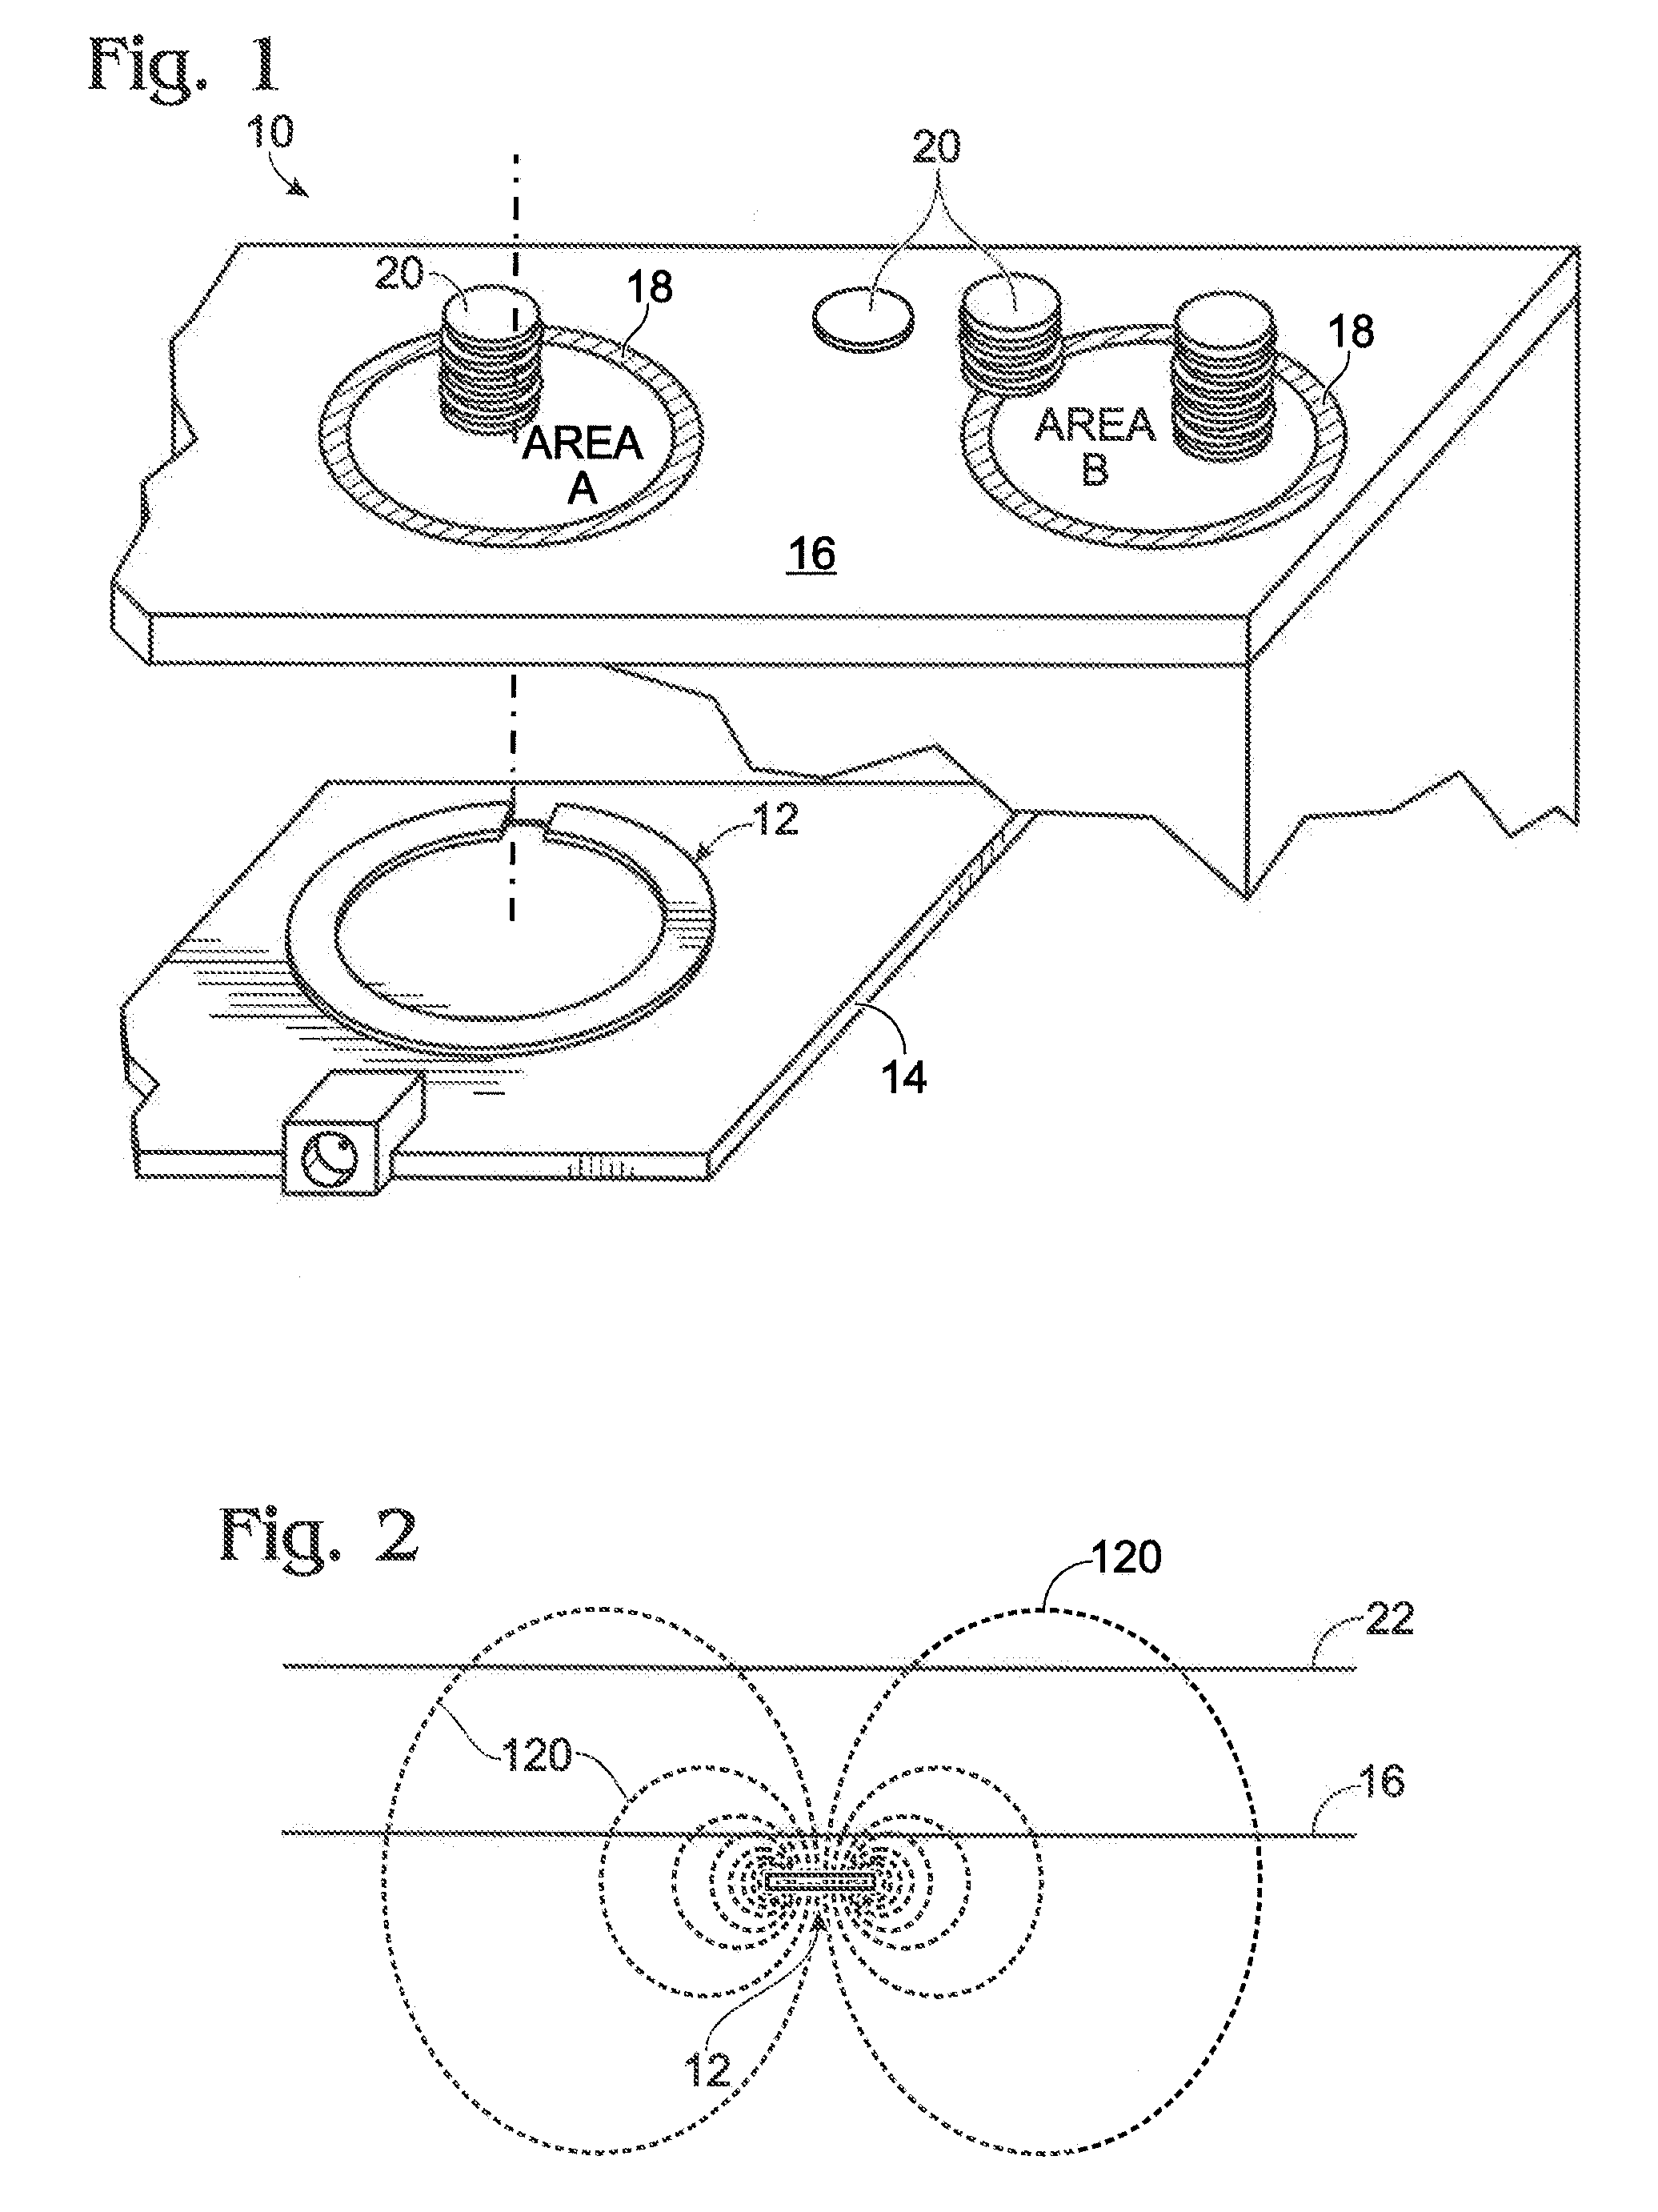 Method and Apparatus for the Identification and Position Measurement of Chips on a Gaming Surface